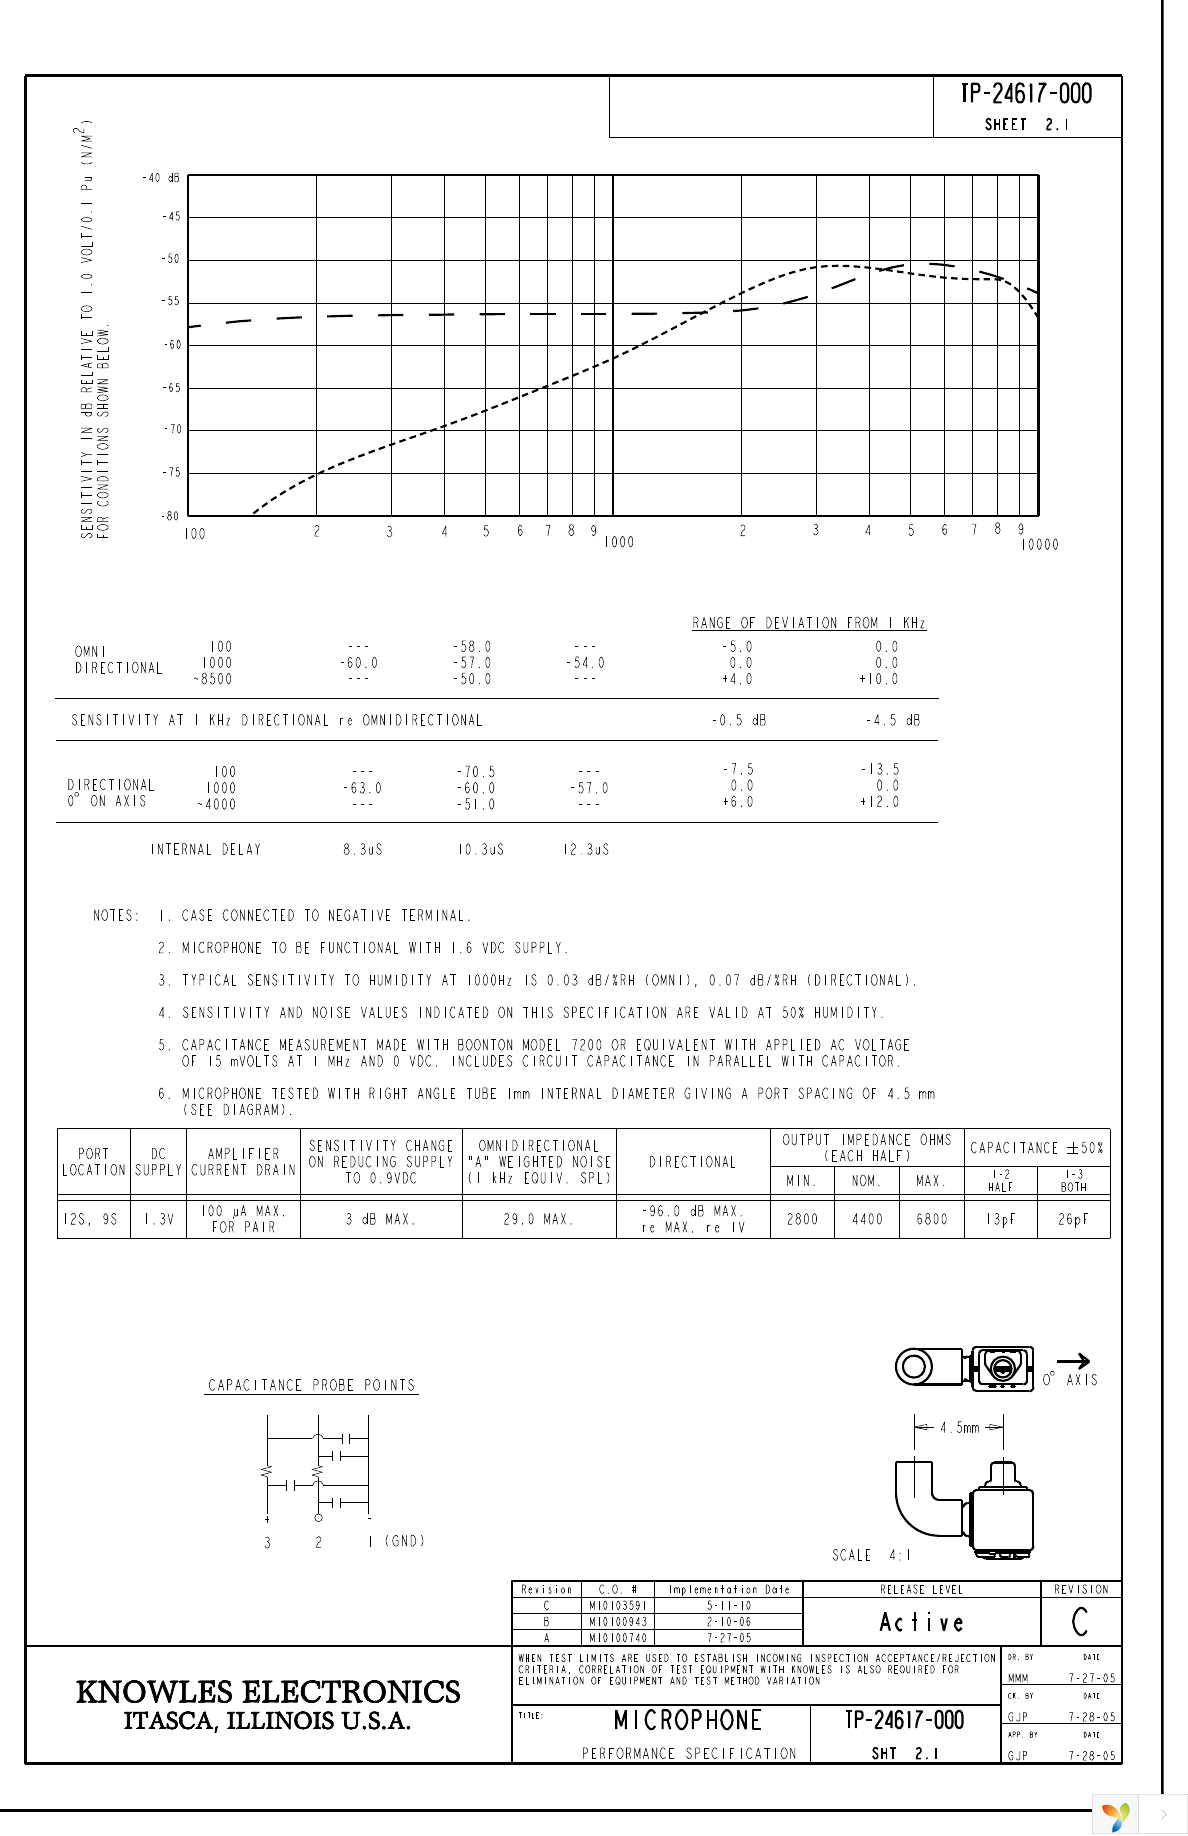 TP-24617-000 Page 2